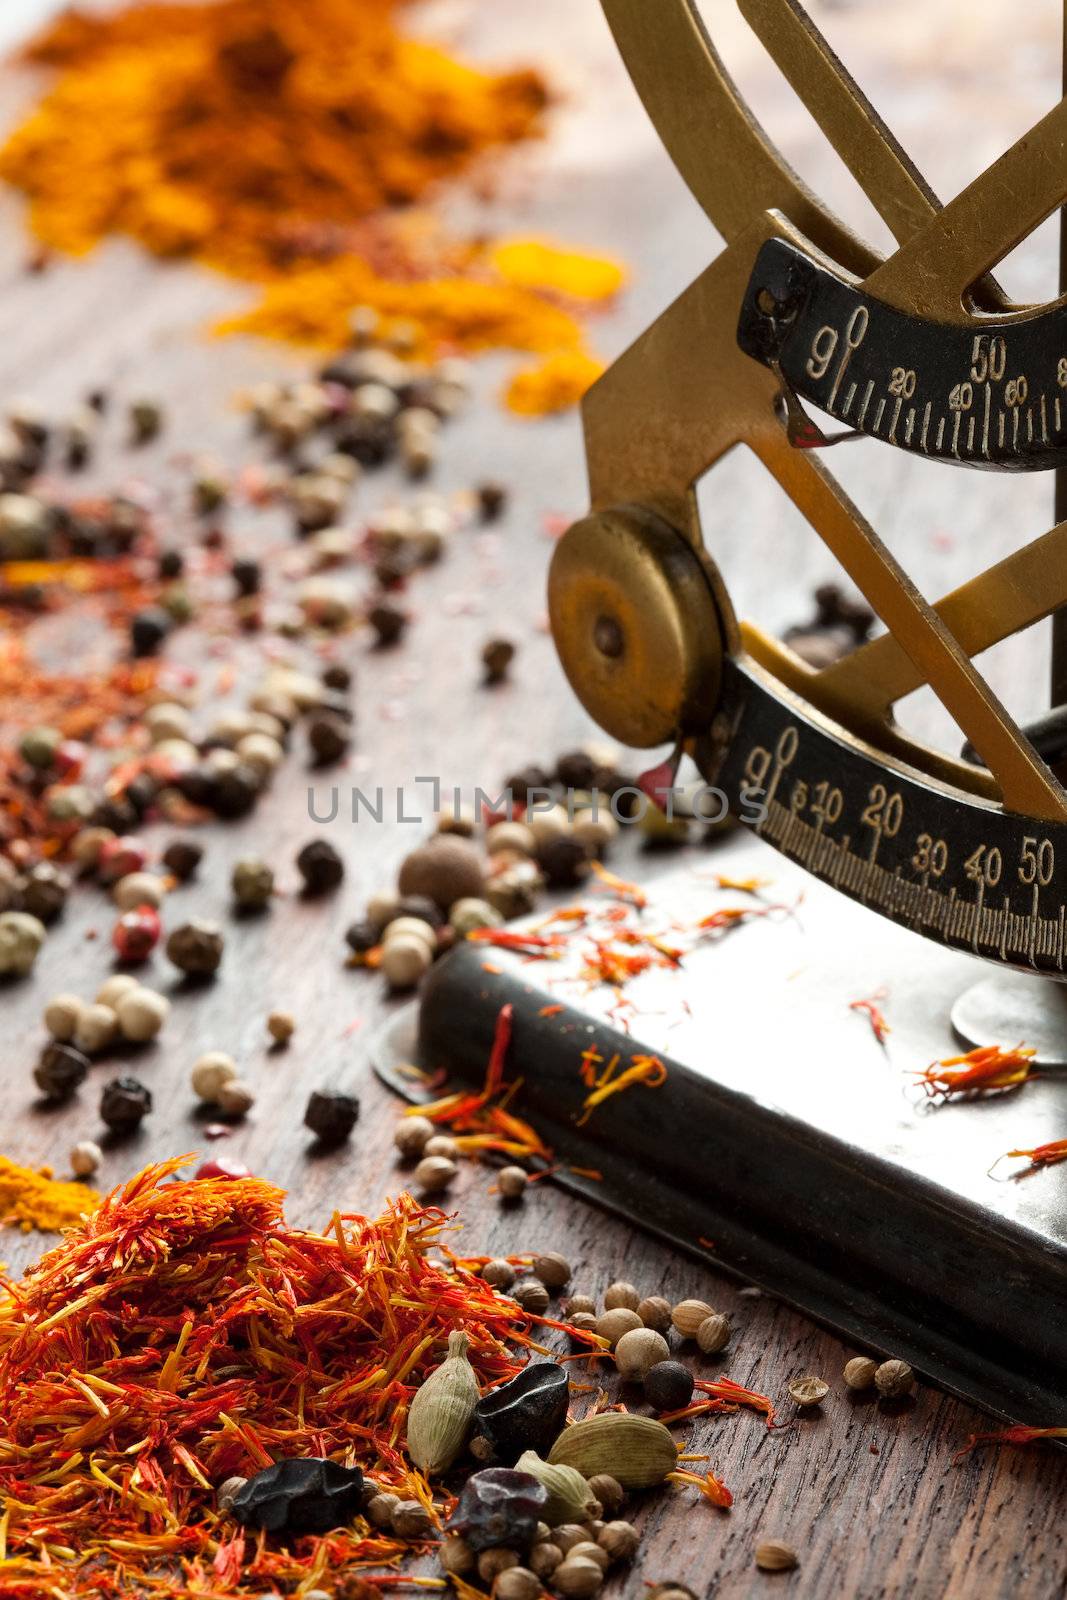 Antique scales, saffron, pepper and other spices